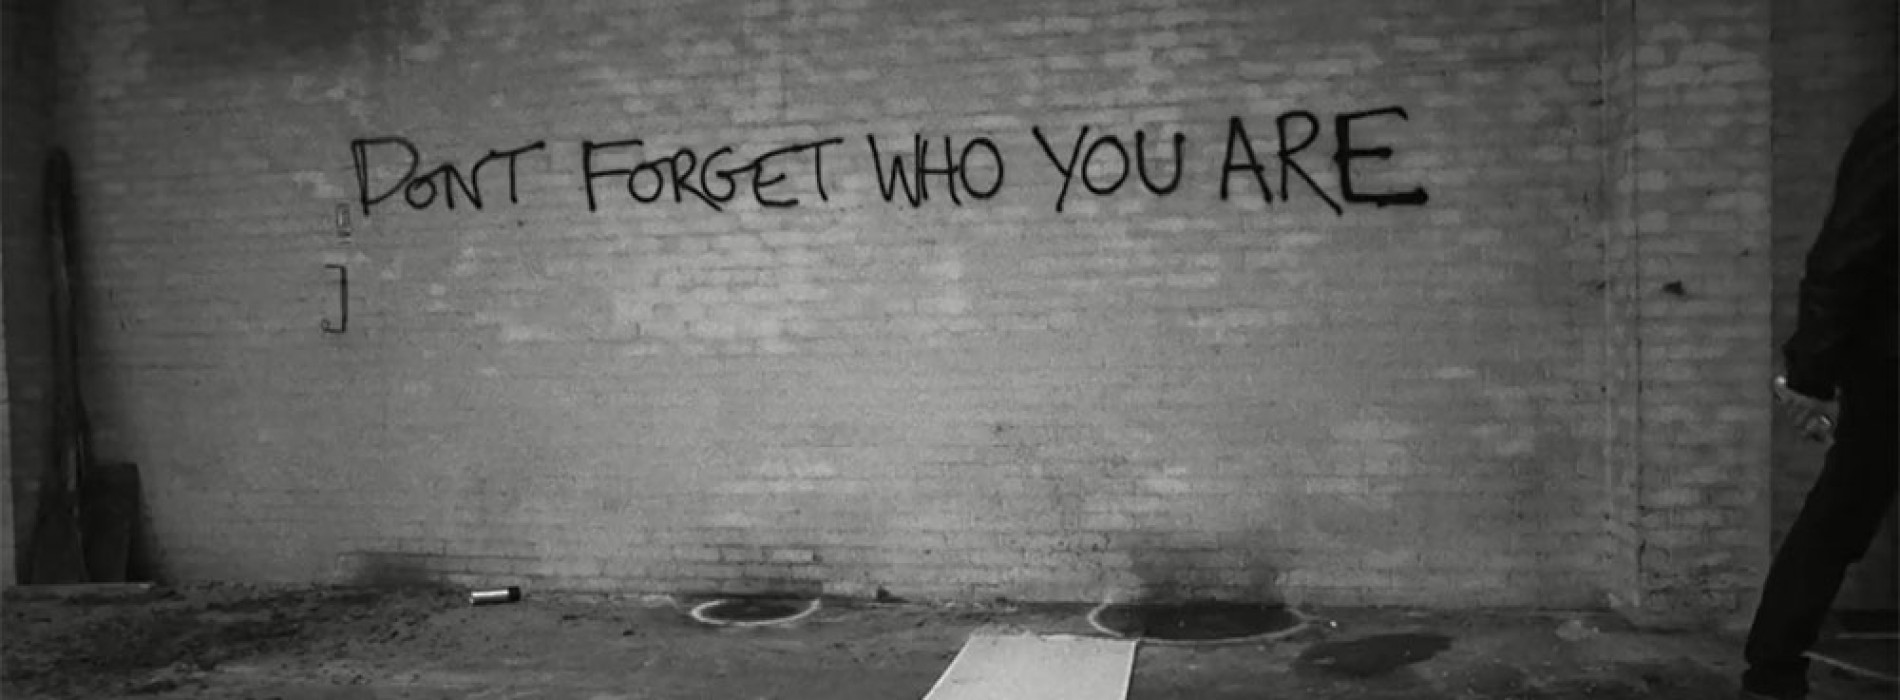 Really you forget me. Don't forget. Who are you надпись на стене. Don't forget who you are. Forgetting who you are.